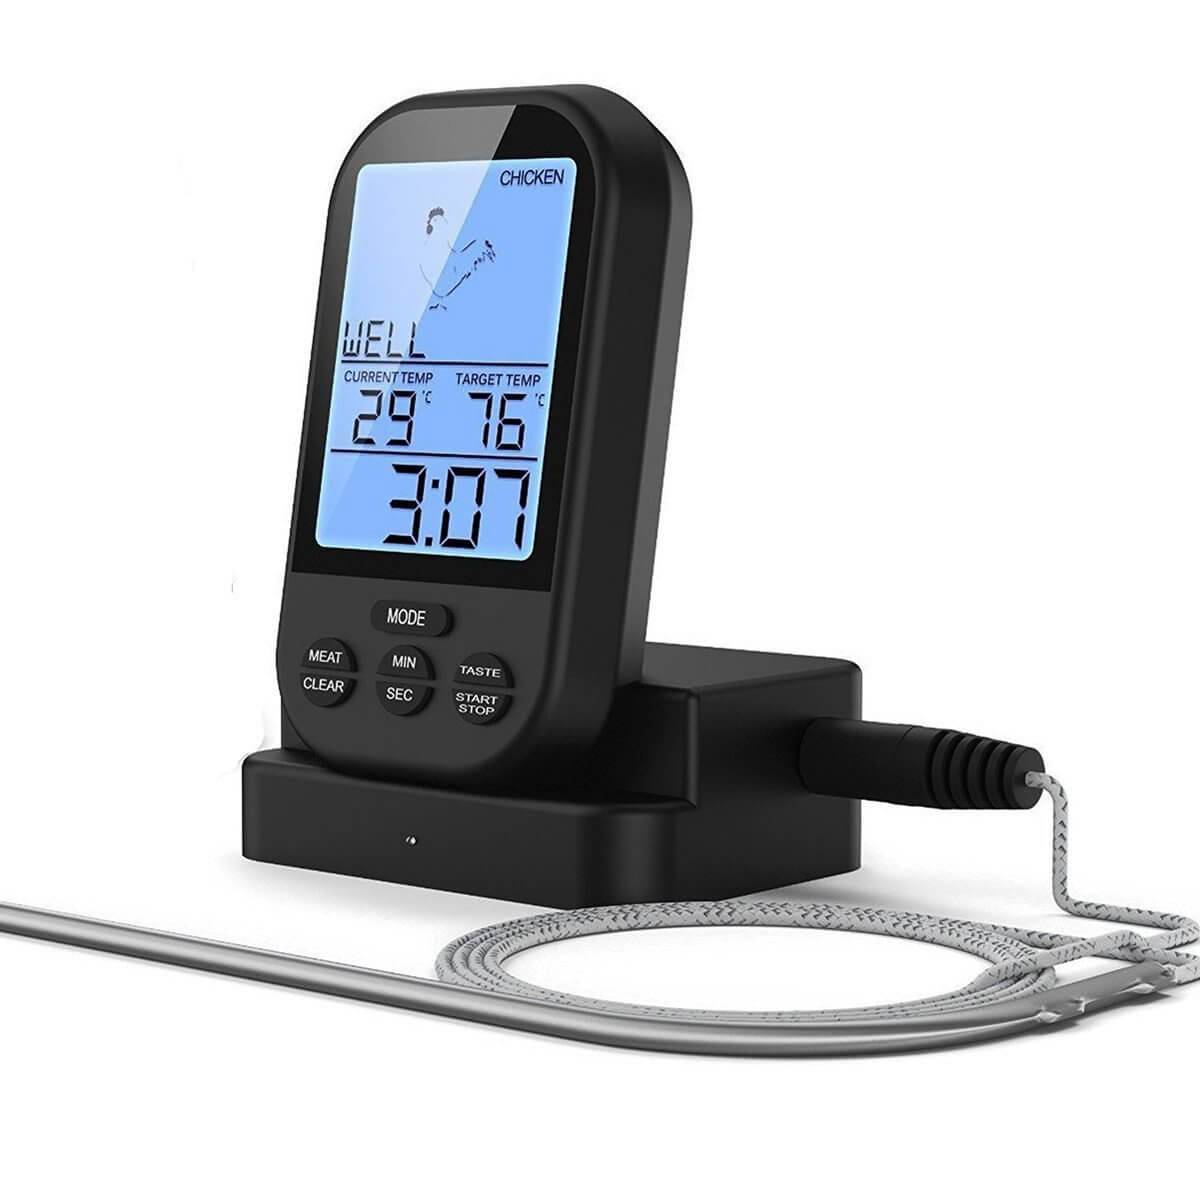 EAAGD Wireless Digital Remote Meat Thermometer